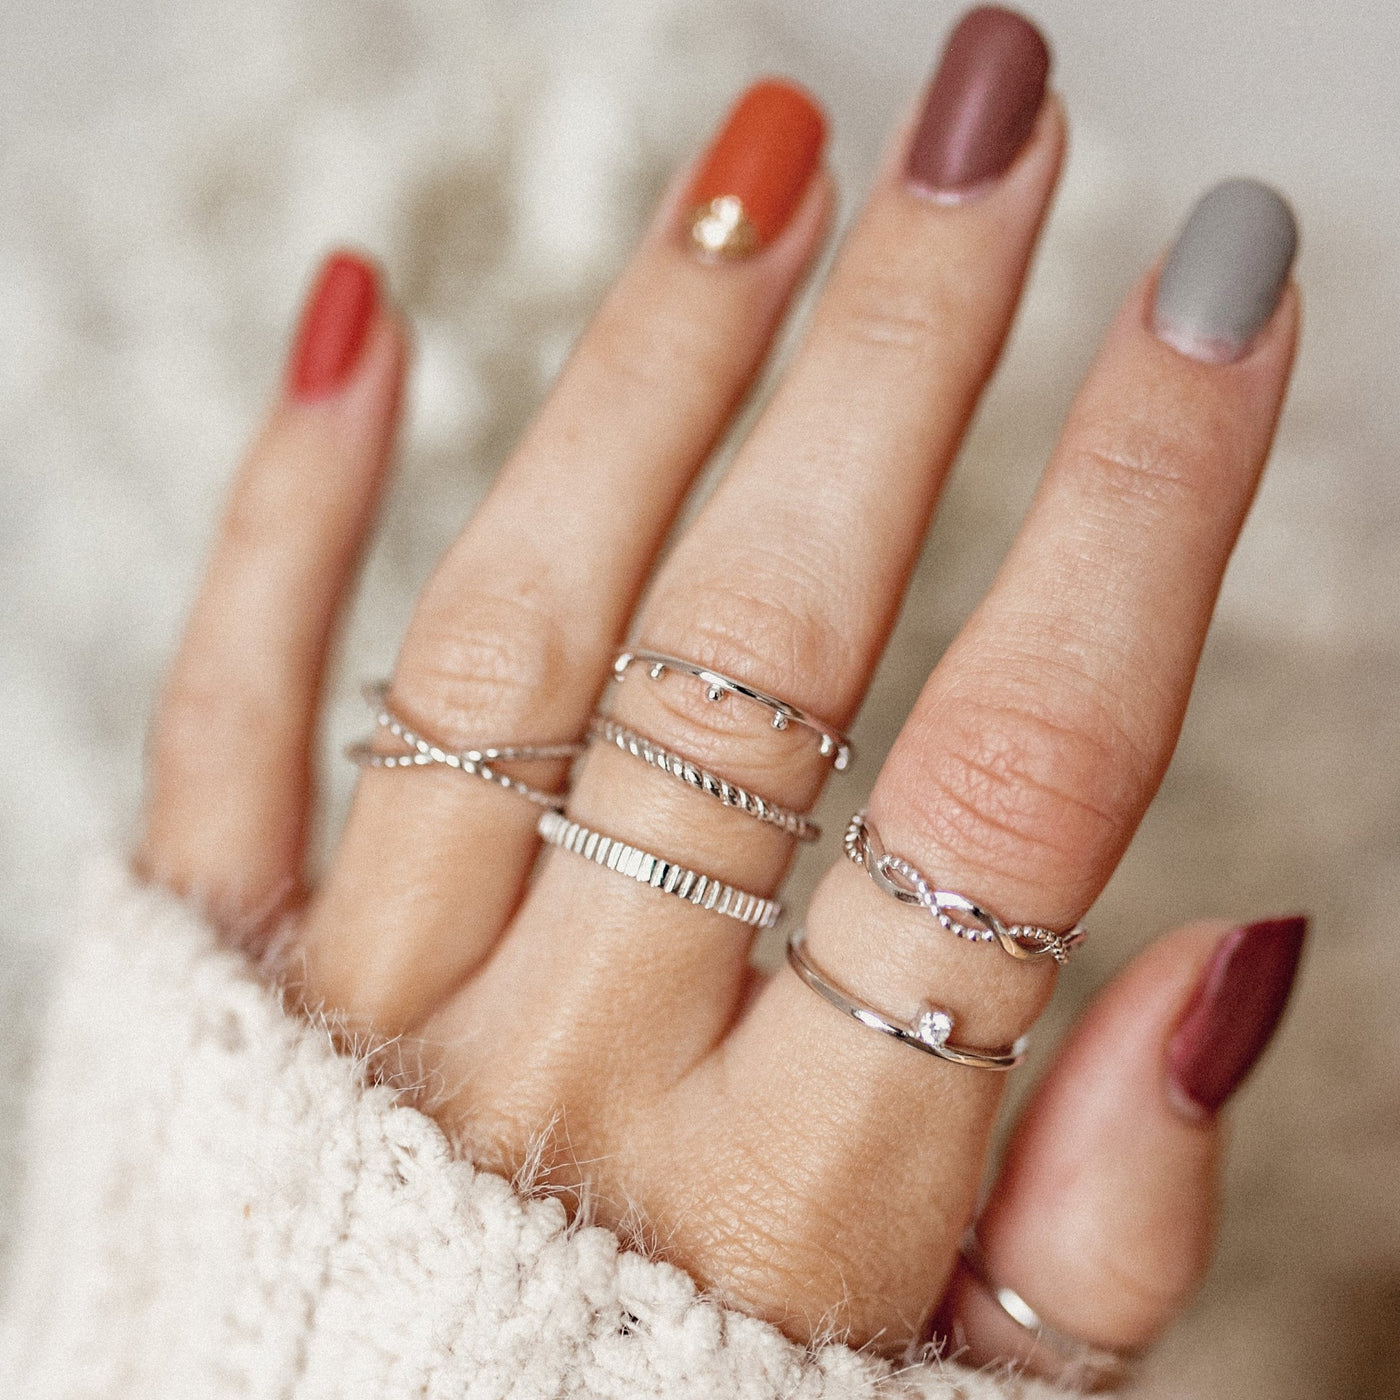 Triple Textured Ring Set Sterling Silver